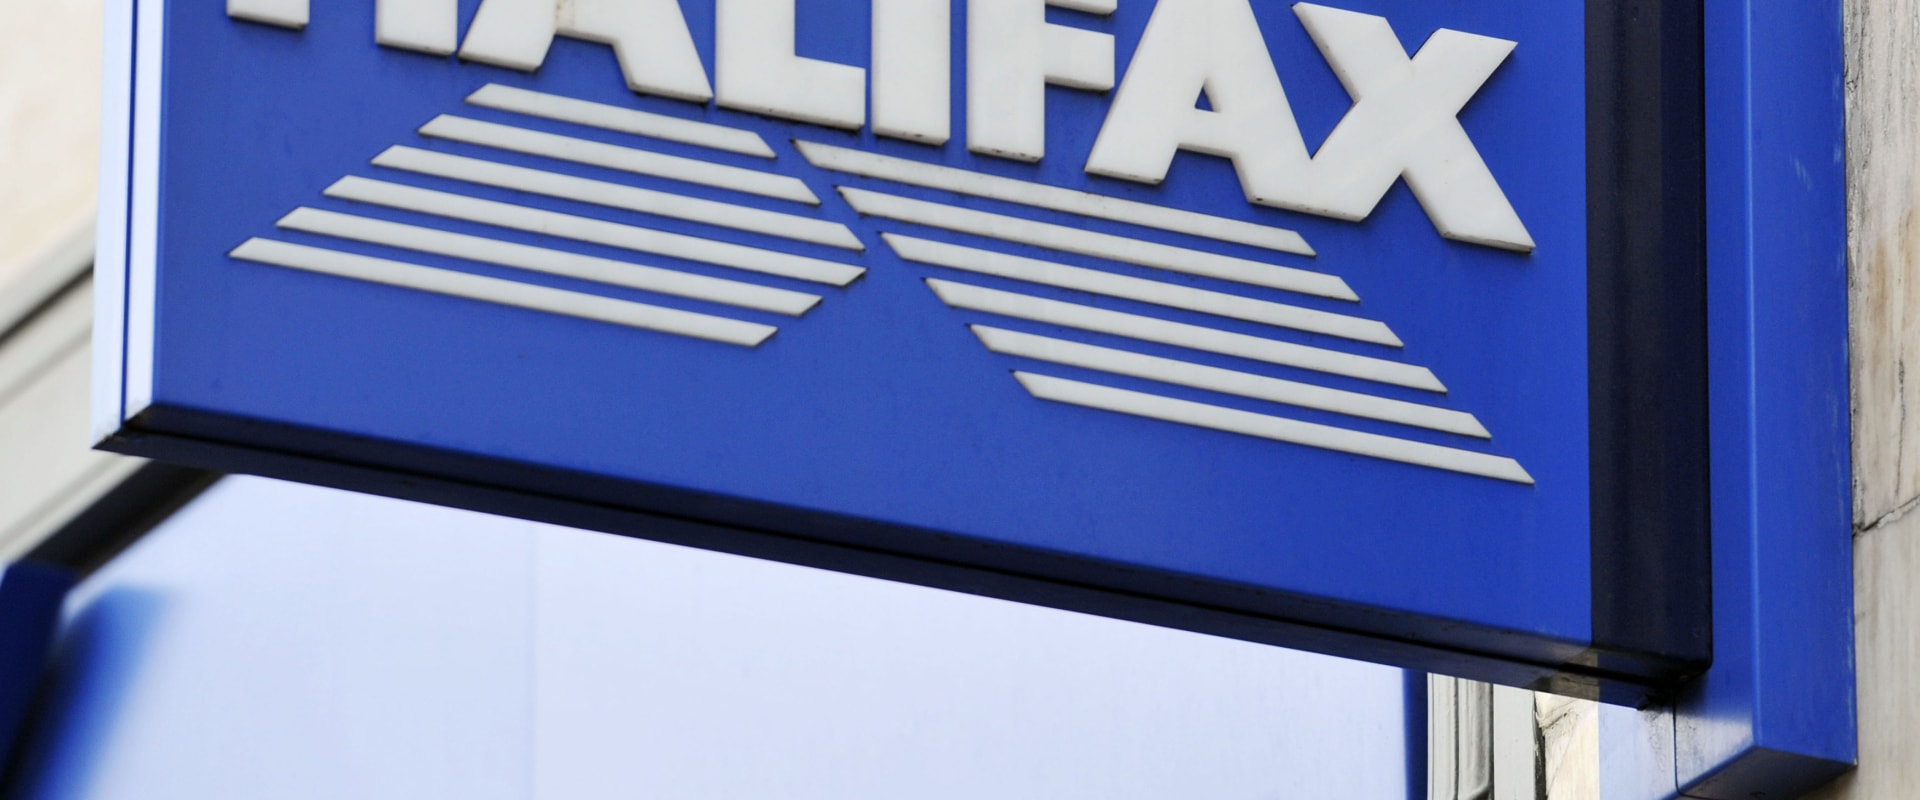 Halifax Mortgage Rates: Deals and Offers Explained